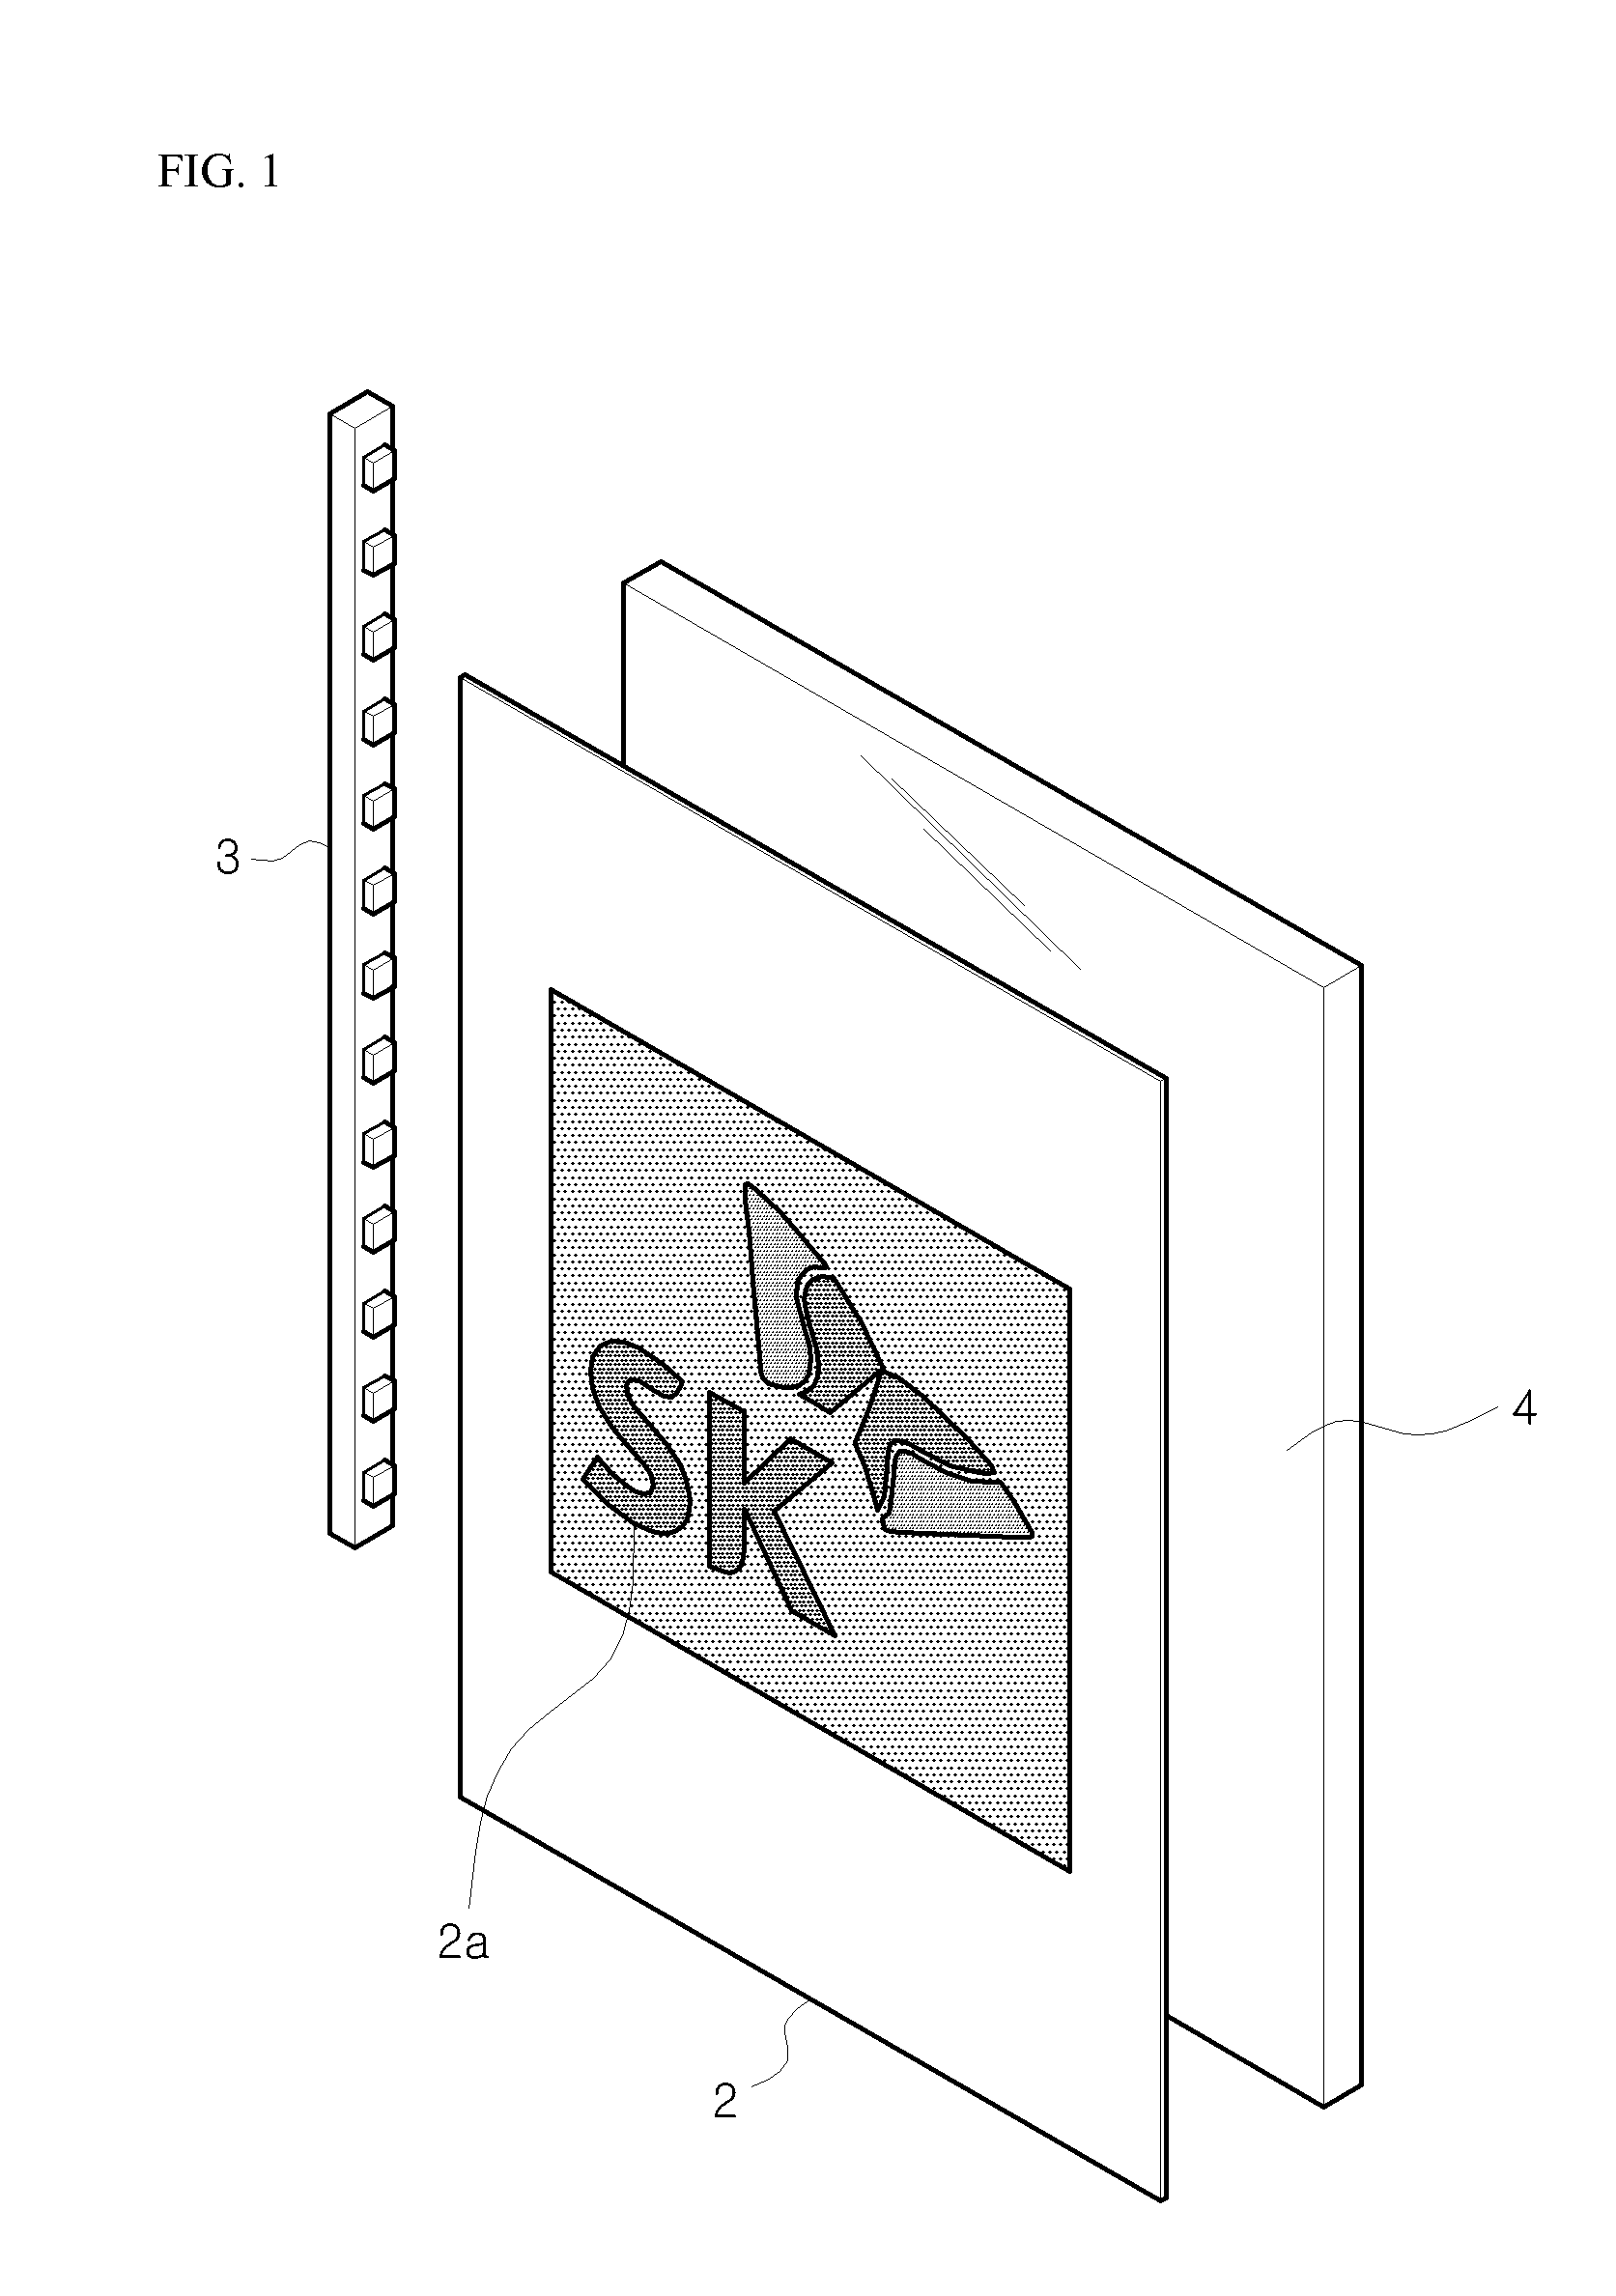 Light-diffusing ink composition and light guide panel using same